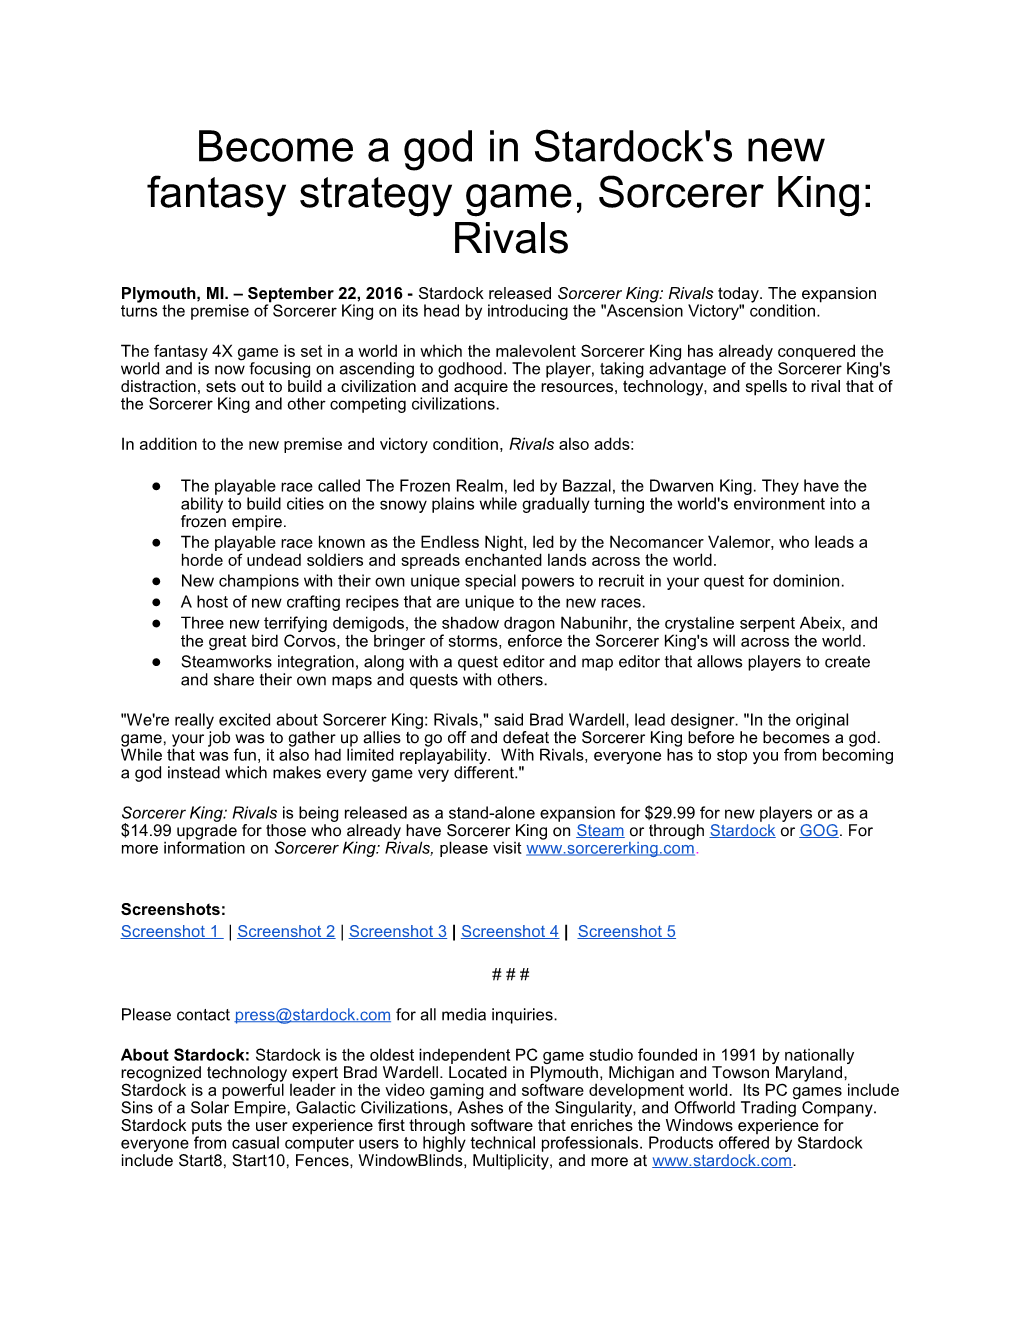 Become a God in Stardock's New Fantasy Strategy Game, Sorcerer King: Rivals